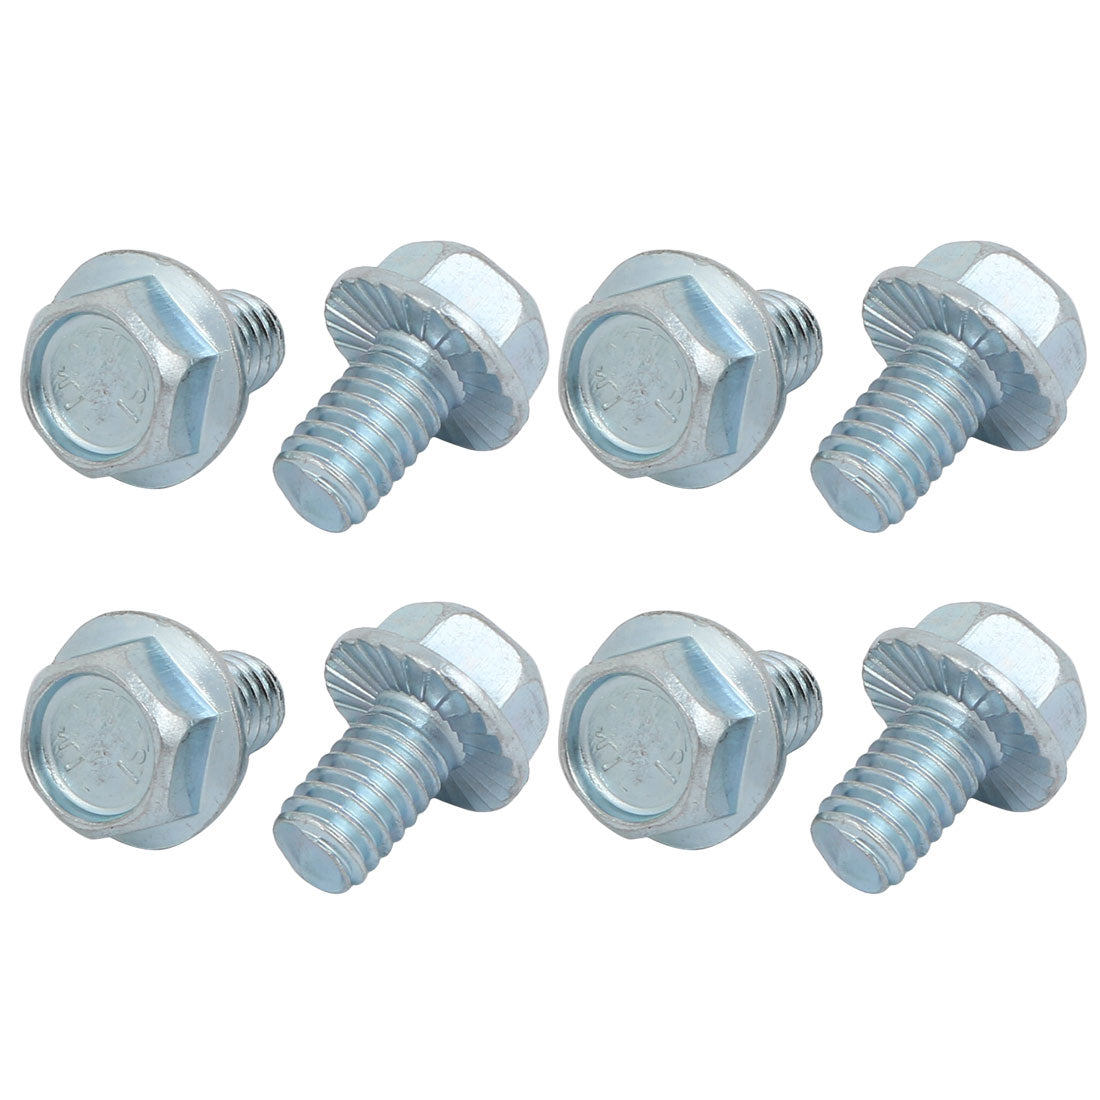 uxcell Uxcell 8Pcs 5/16-18 x 1/2 Inch Thread Carbon Steel Hex Serrated Head Flange Screw Bolt